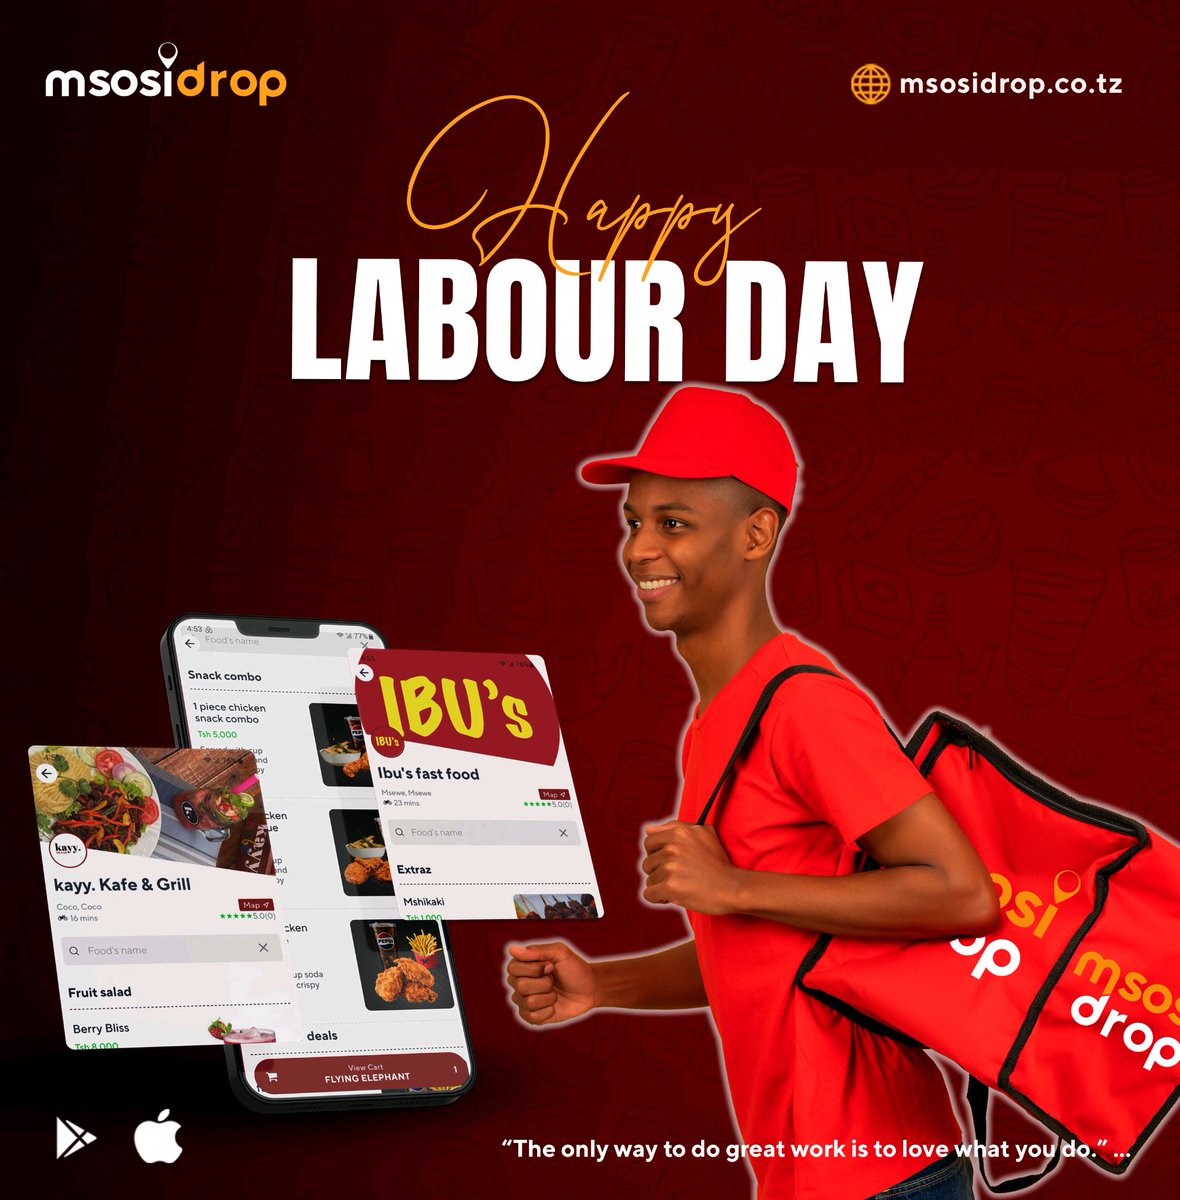 Happy Workers' Day to all hardworking individuals out there! Take a break from the grind and order your favorite meal with the msosidrop app 📱. 
Let us handle the cooking while you enjoy some well-deserved downtime! 🍔🛋️ #WorkersDay #msosidrop #RelaxAndRecharge #msosidropper